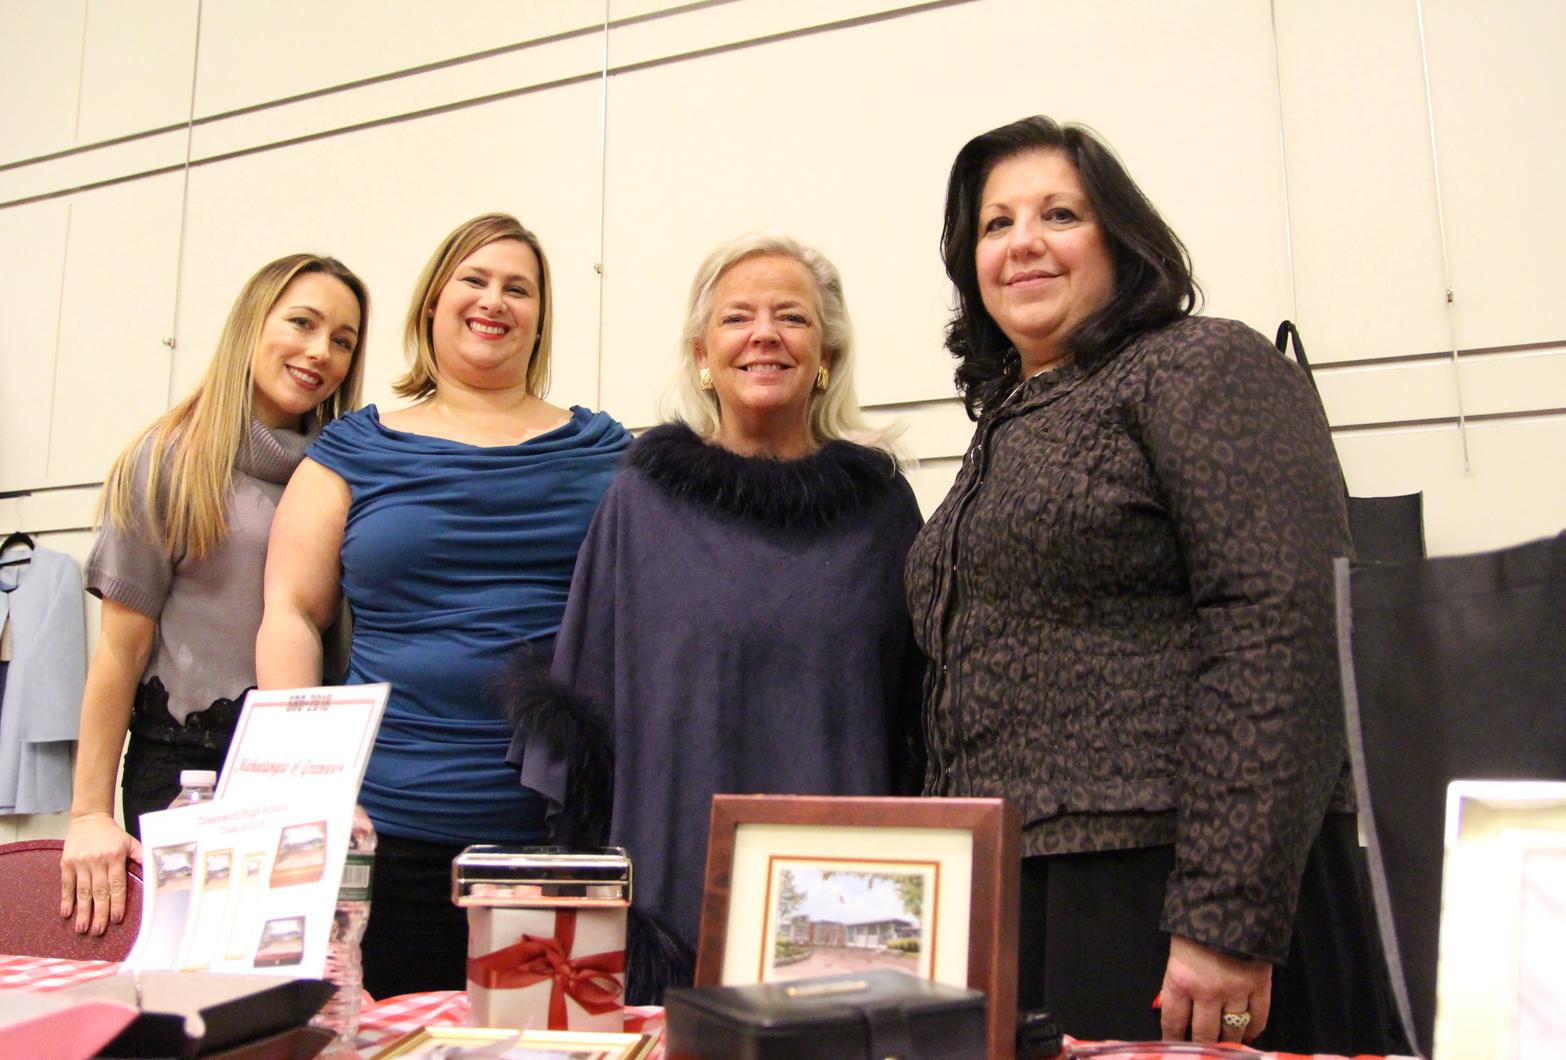 Torri Varbero and Danielle Torres from Indulge Salon and Beauty Bar; Nancy Waesche from Pinky of Greenwich with Gail Papa from Michaelangelo of Greenwich at the PTA event before SRO, March 9, 2018 Photo: Leslie Yager